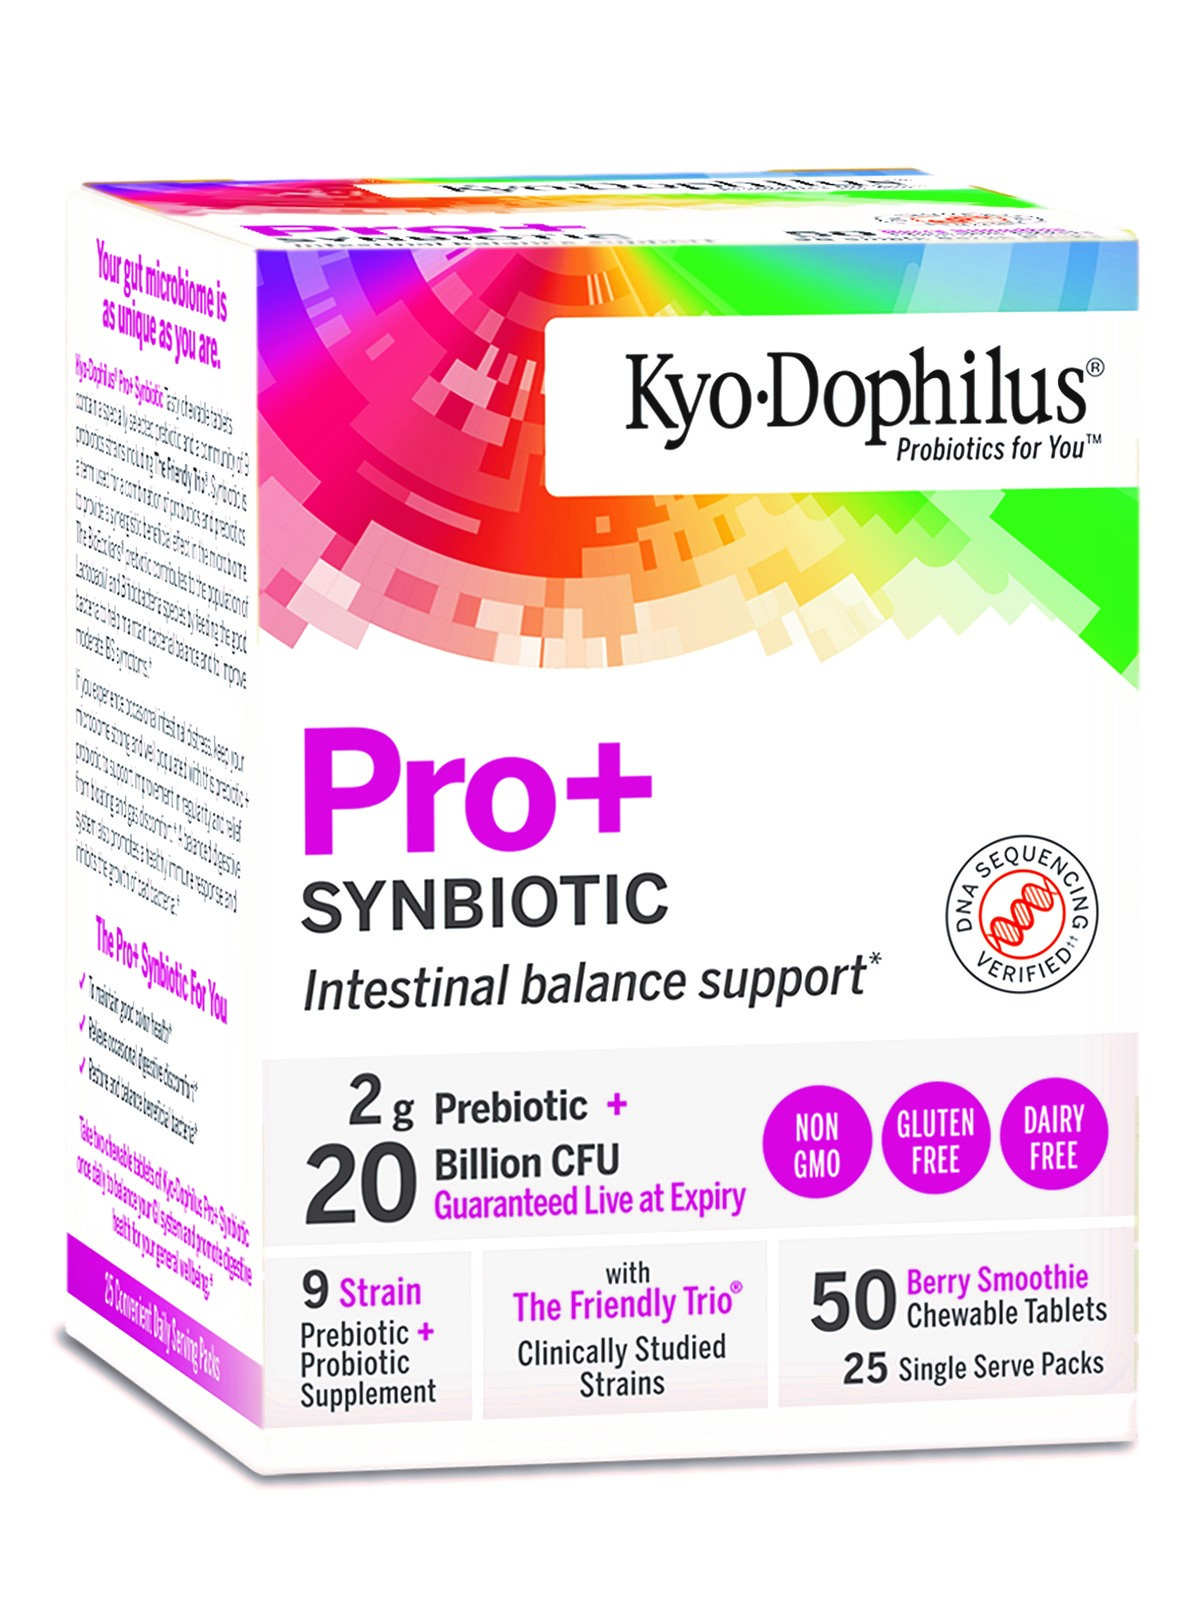 Kyo-Dophilus Pro+ Synbiotic contains 20 billion CFU of a diverse community of nine beneficial bacteria species, including Wakunaga’s “The Friendly Trio,” a clinically studied blend of L. gasseri KS-13, B. bifidum G9-1, and B. longum MM-2. Published studies show that this specific combination of strains improves digestion, reduces cold and seasonal allergy symptoms, and restores a healthy microbiome in older adults